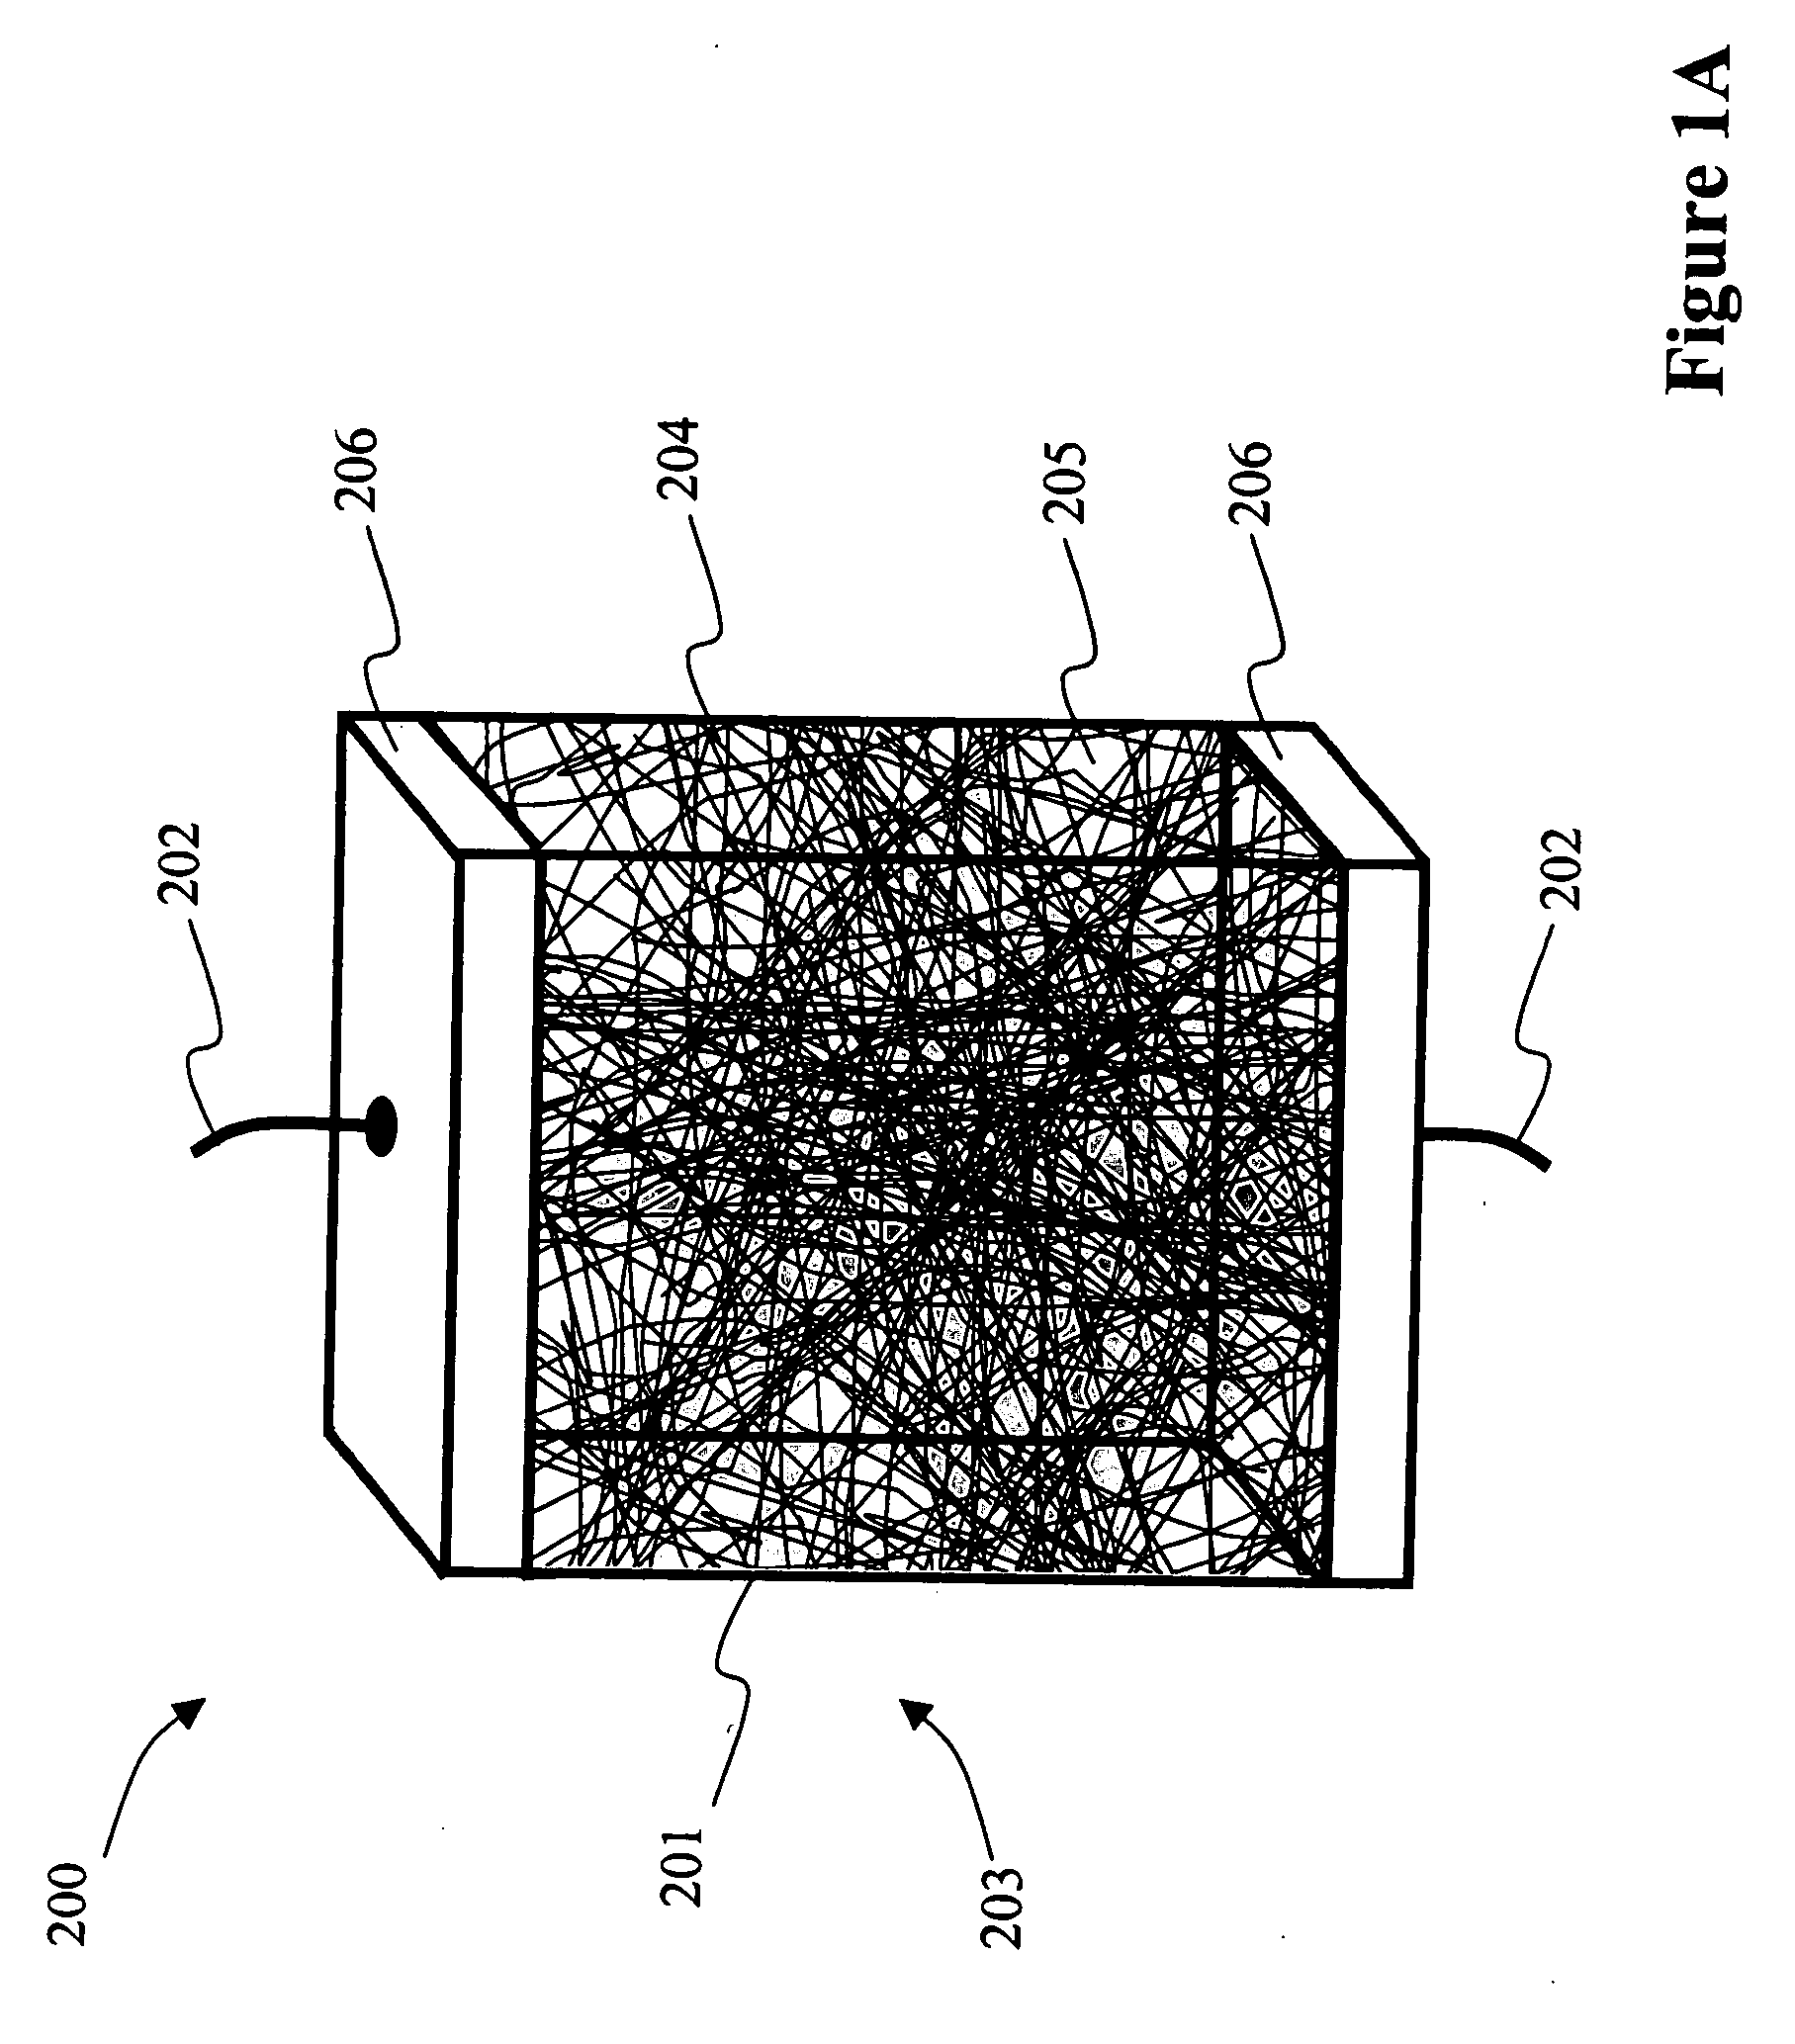 Electrical component with fractional order impedance